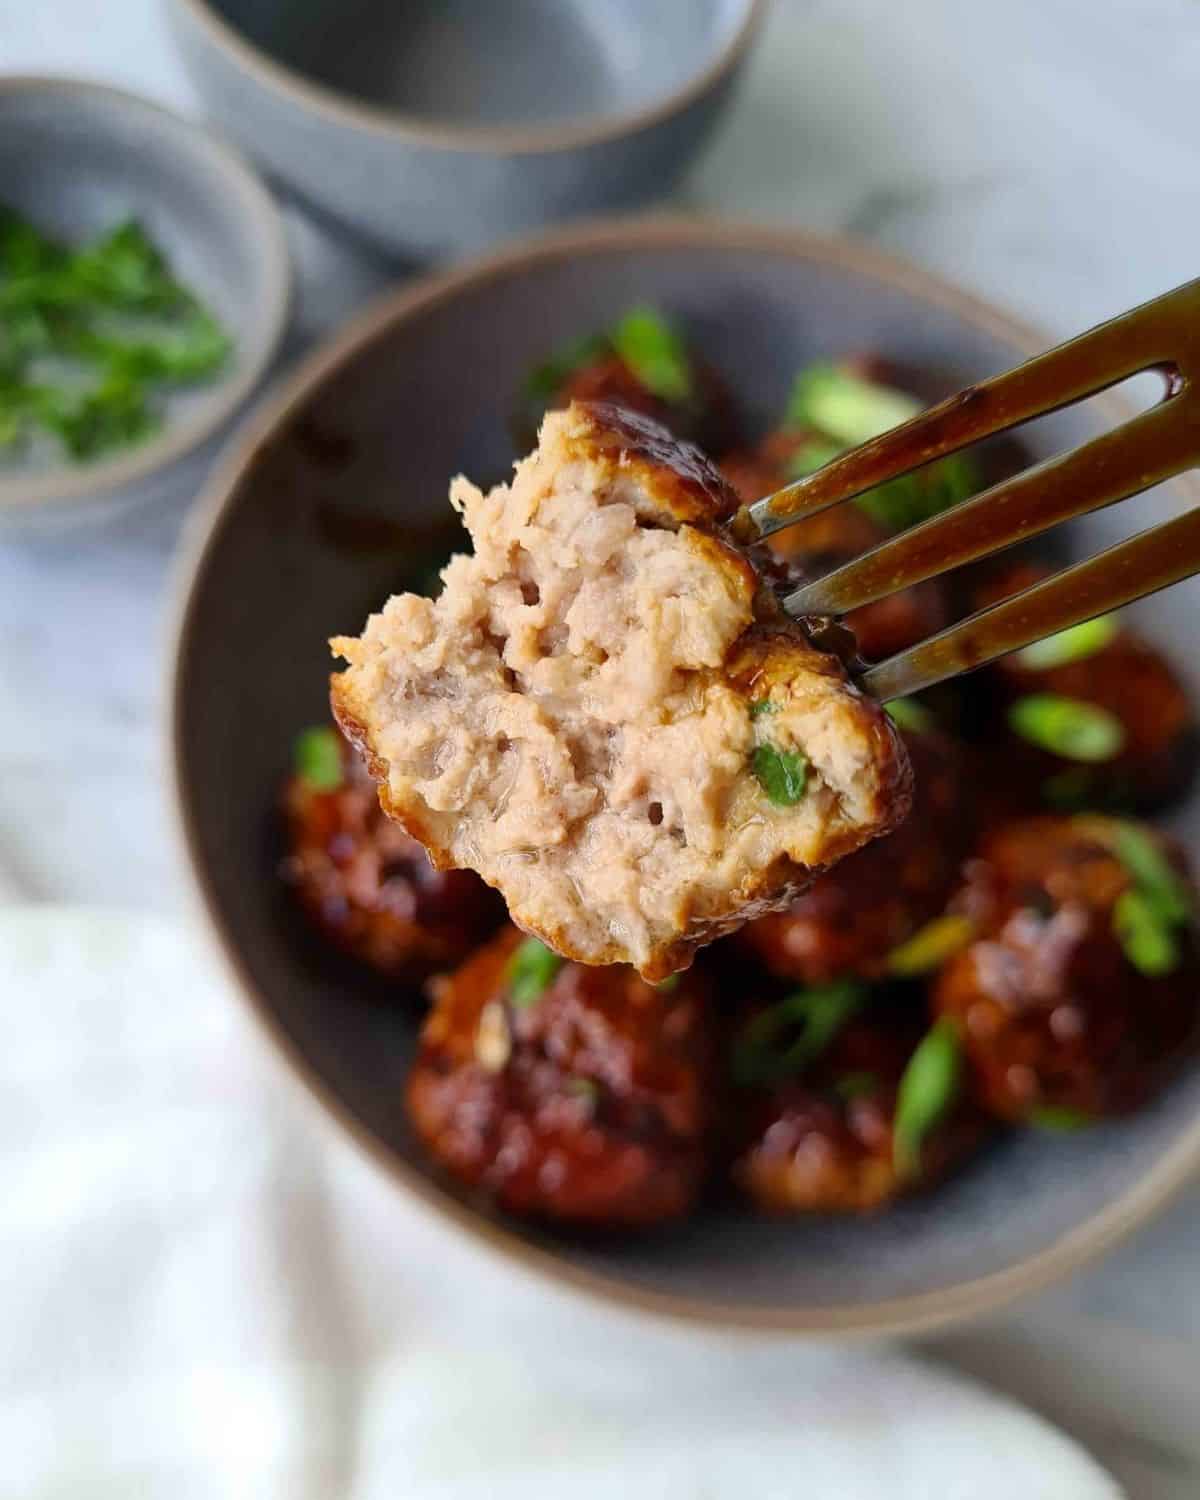 Close up of a bitten meatball, showing its juiciness